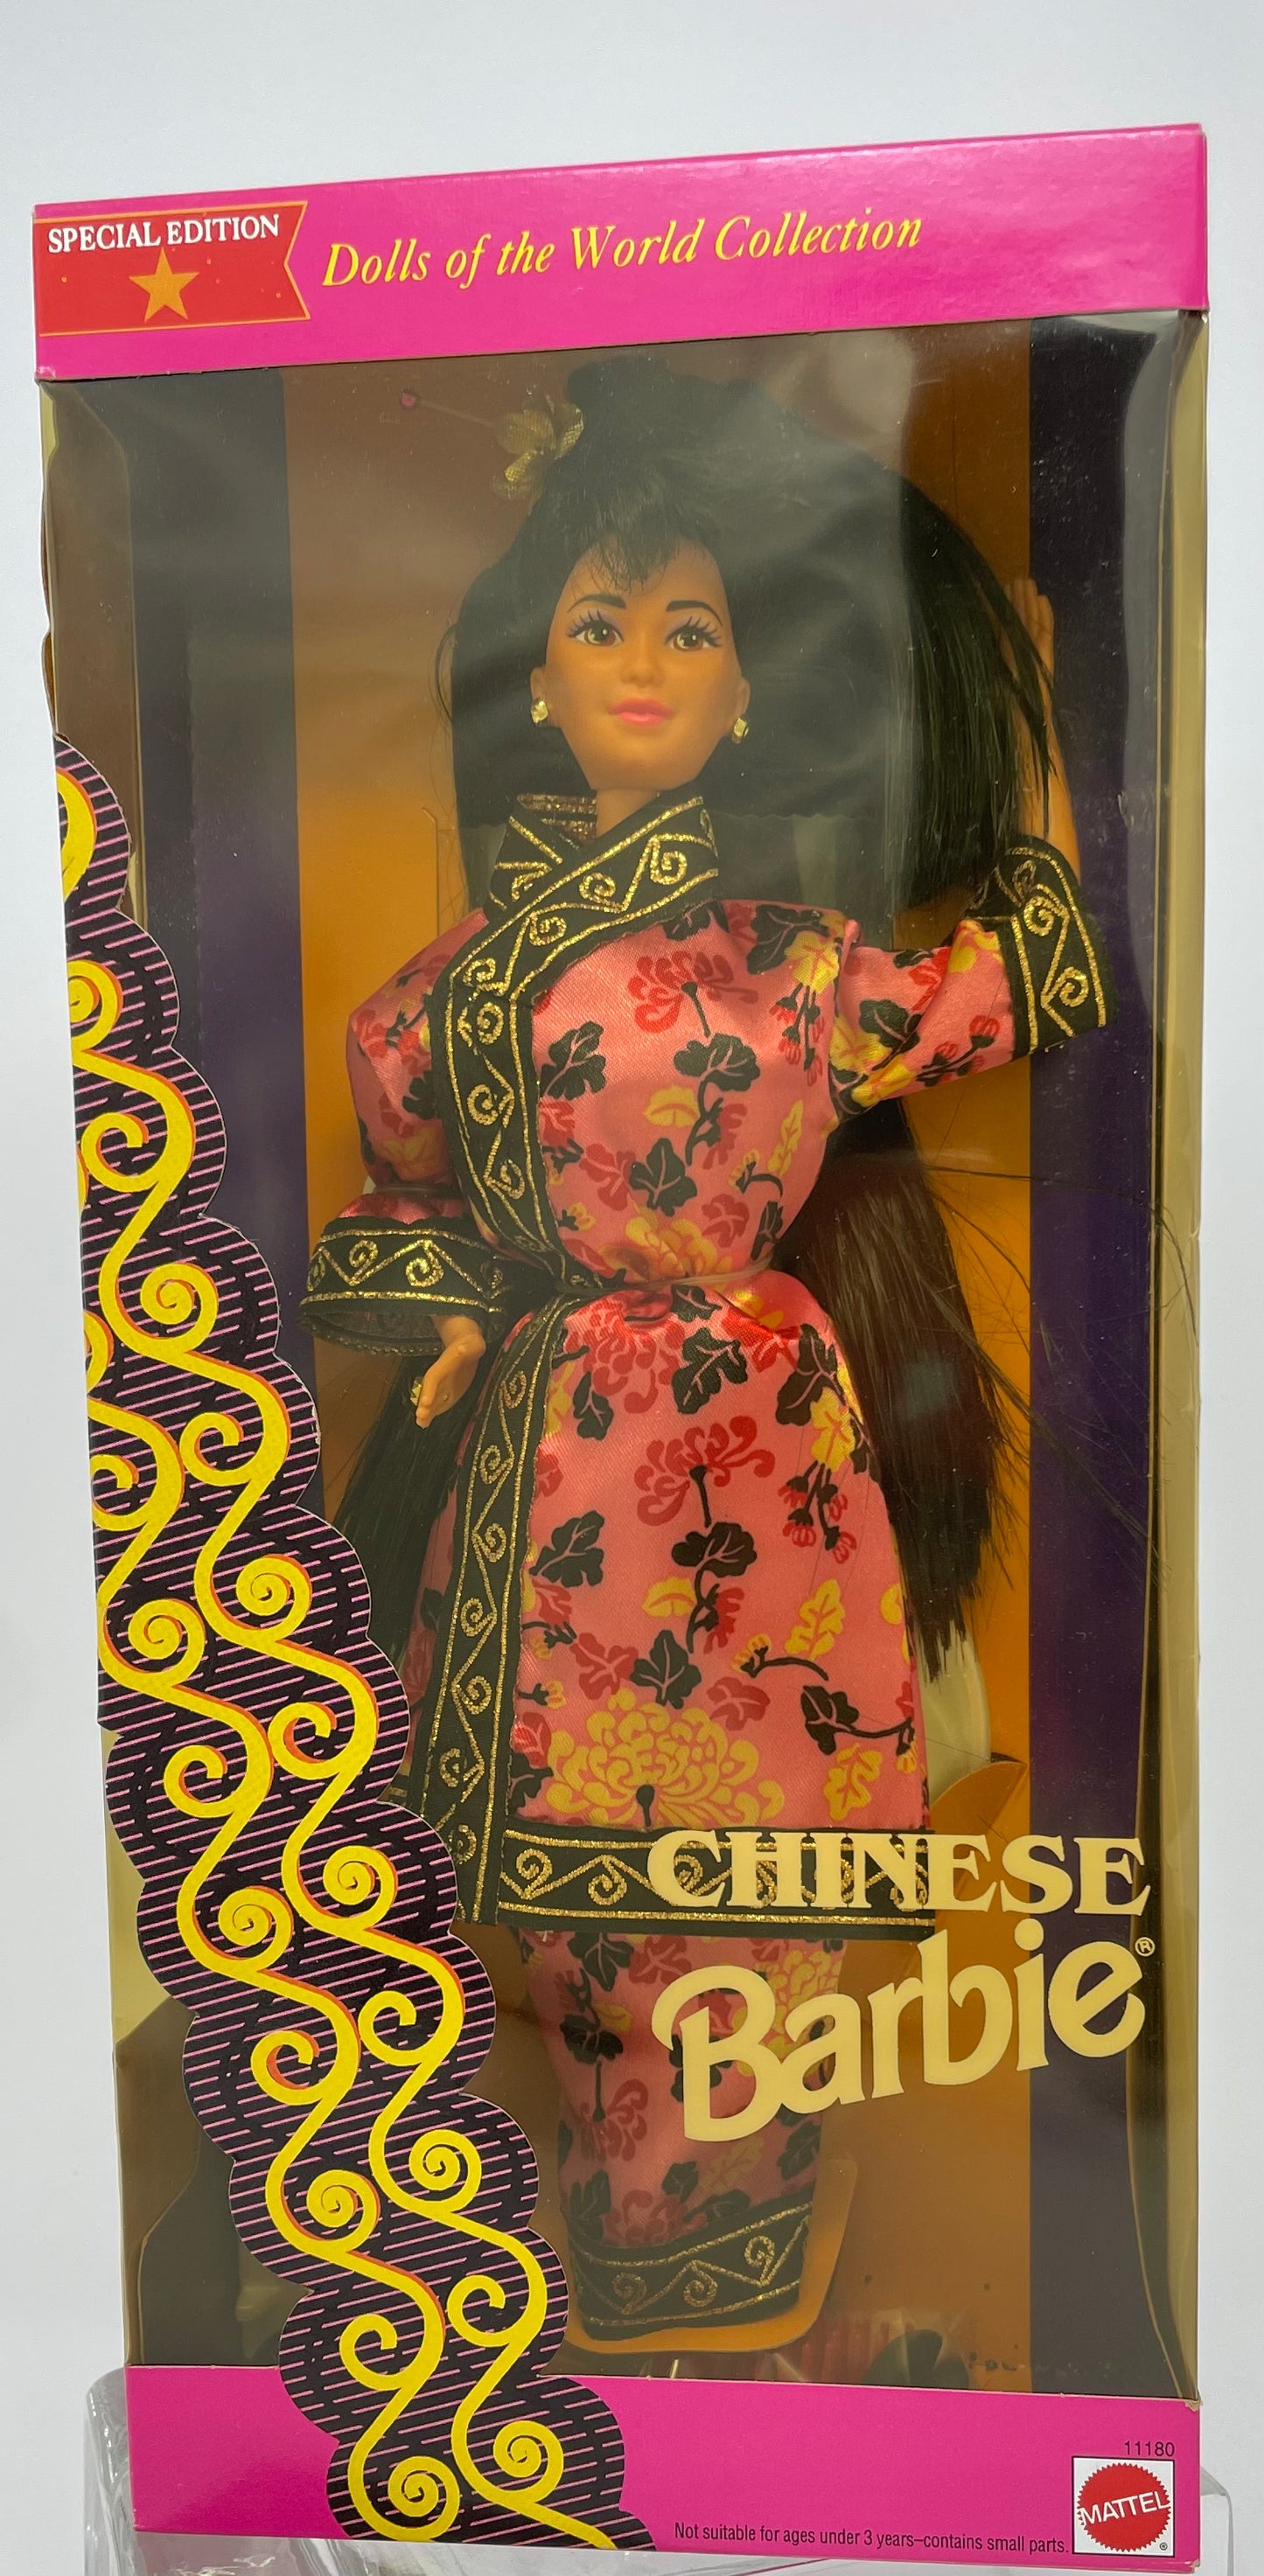 CHINESE BARBIE - DOLLS OF THE WORLD COLLECTION - SPECIAL EDITION - # 11180 - MATTEL 1993